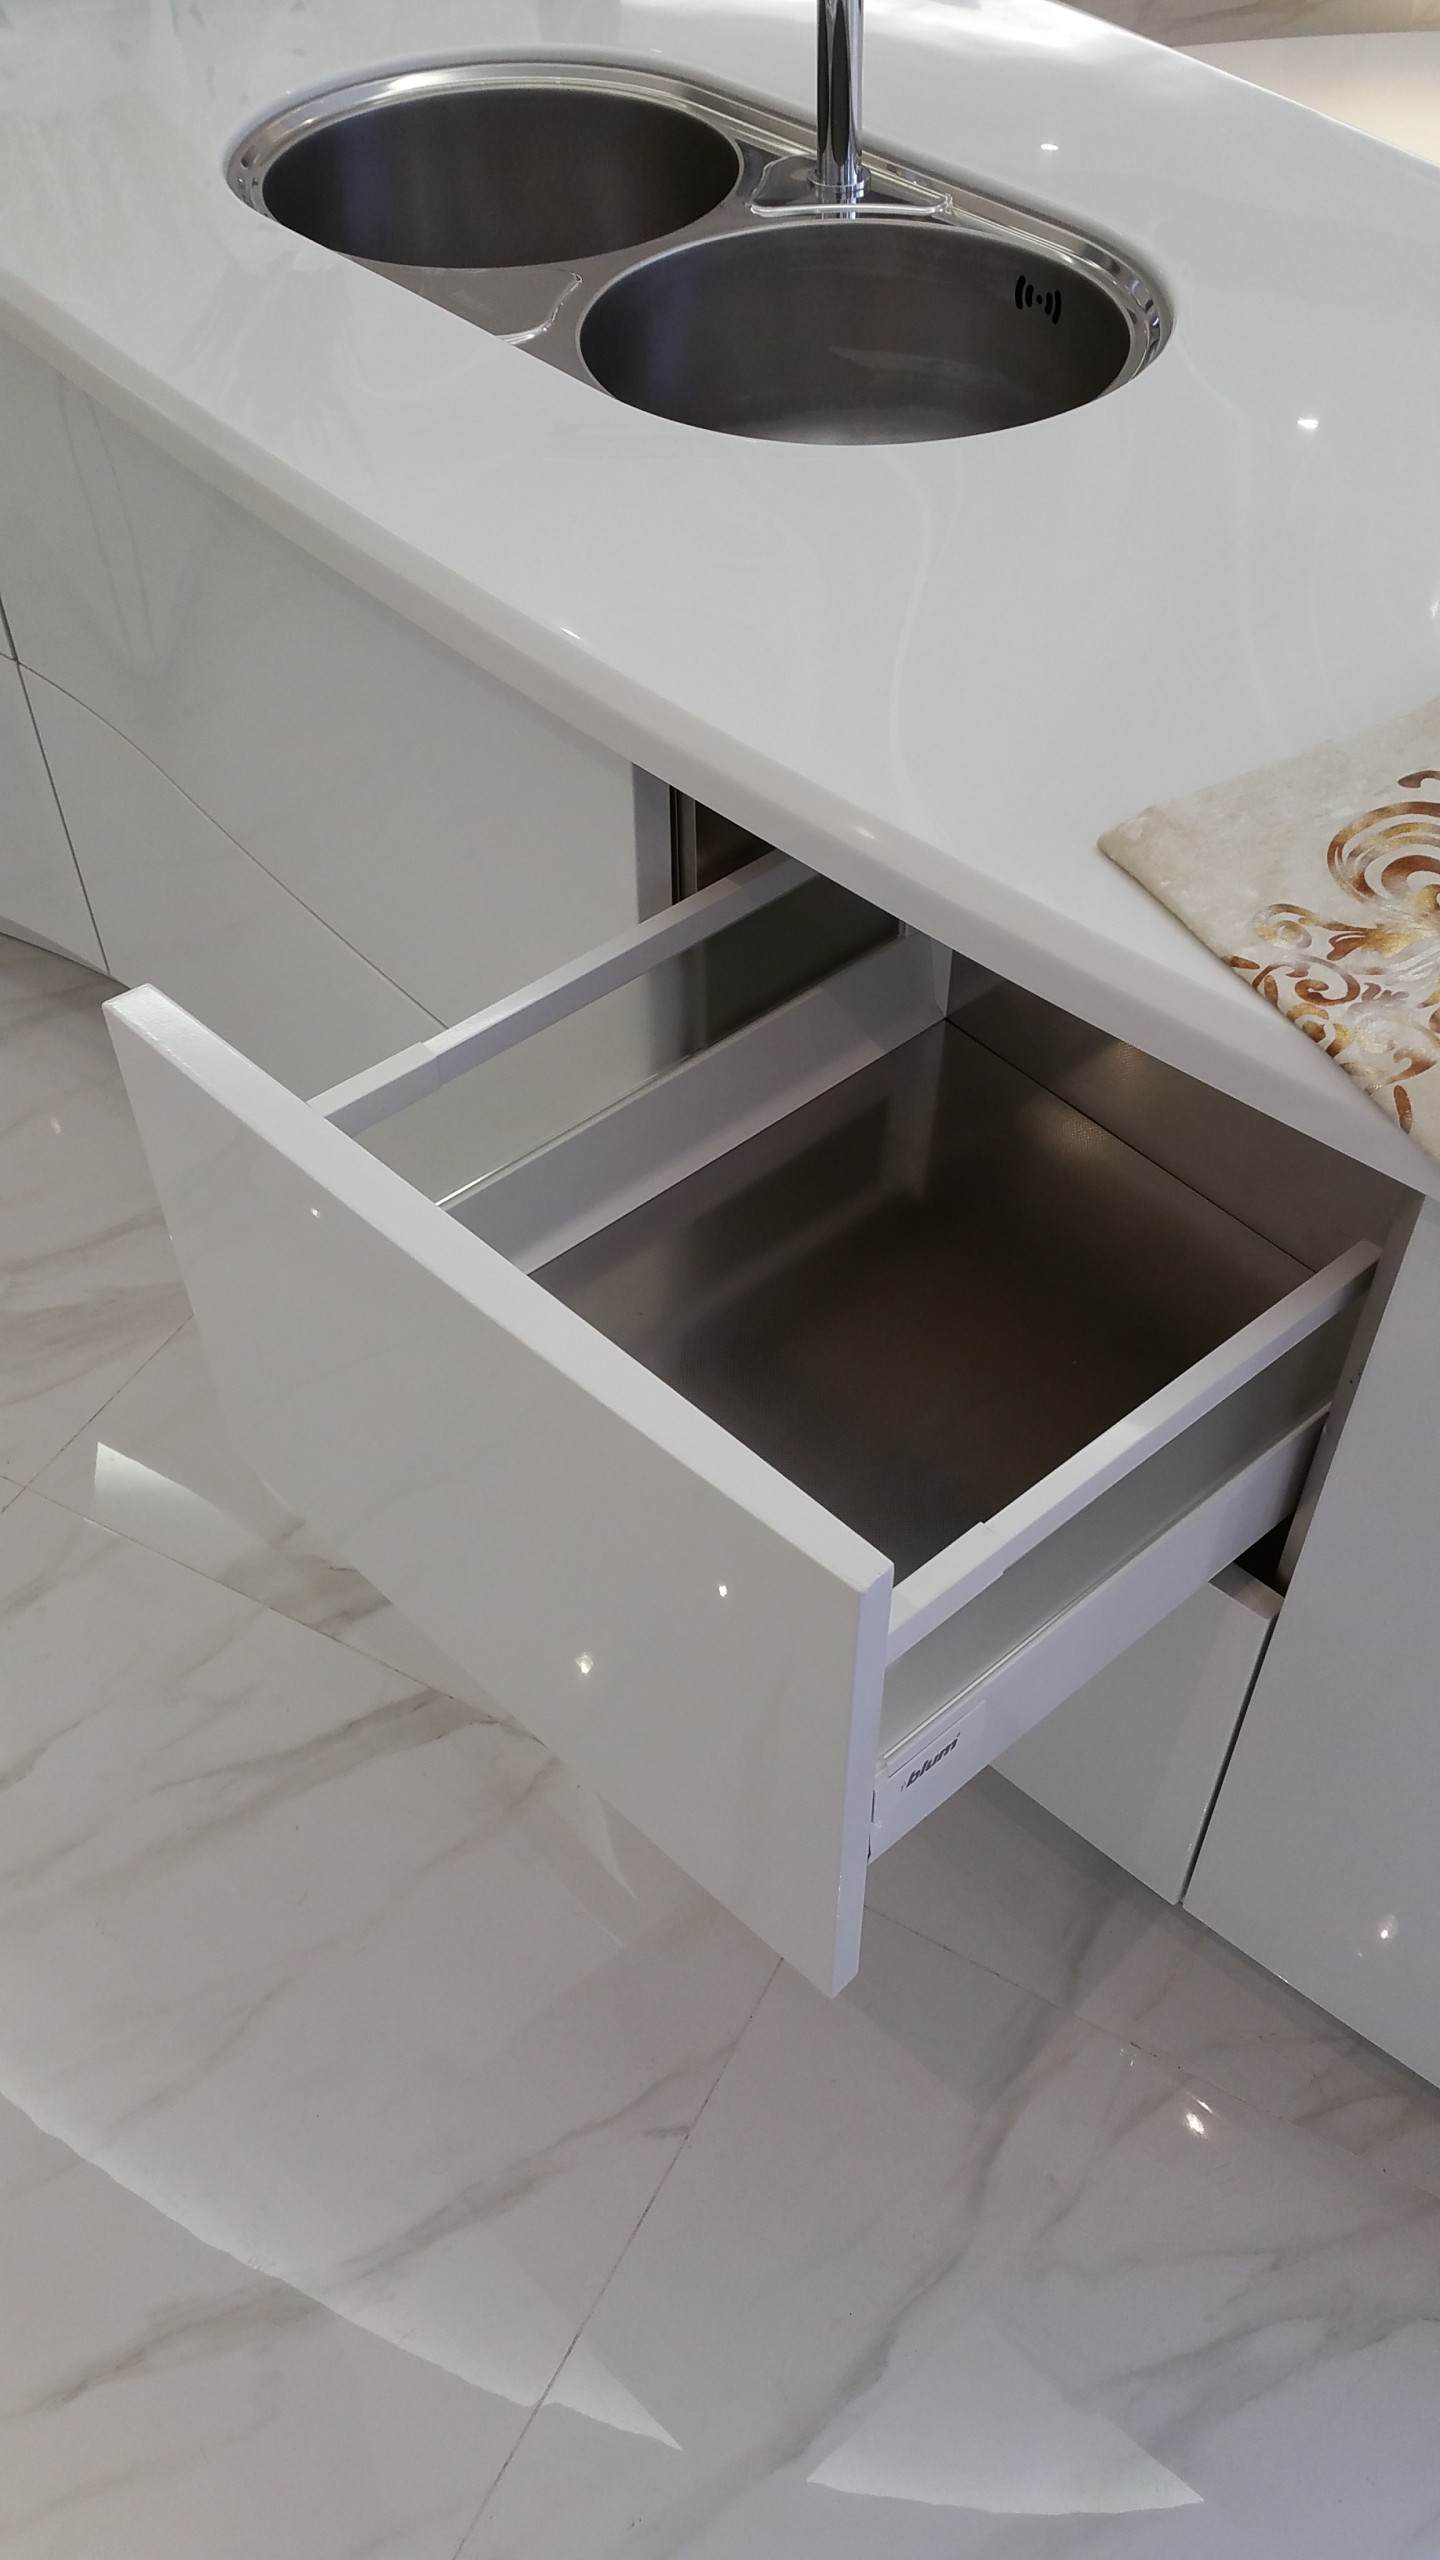 Stainless Steel cabinetry with electroplated finish